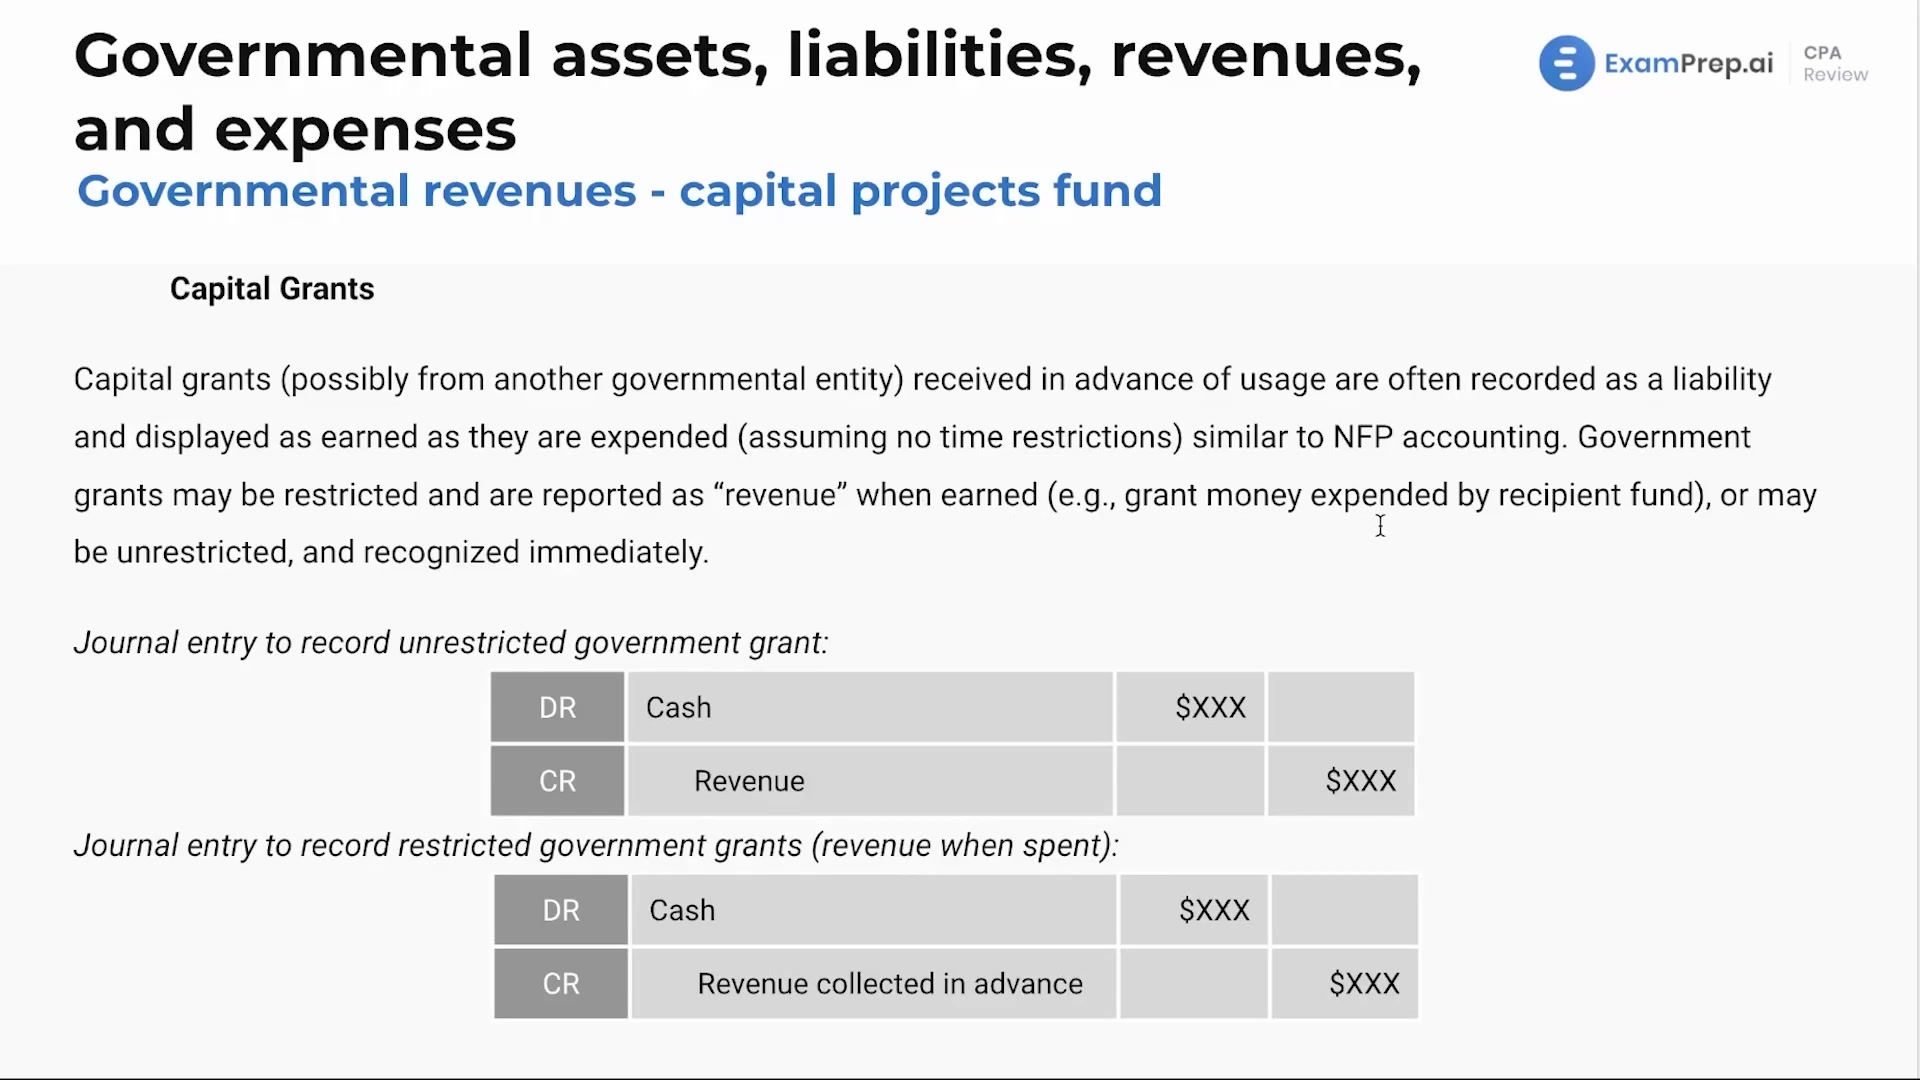 Governmental Revenues - Capital Projects Fund lesson thumbnail